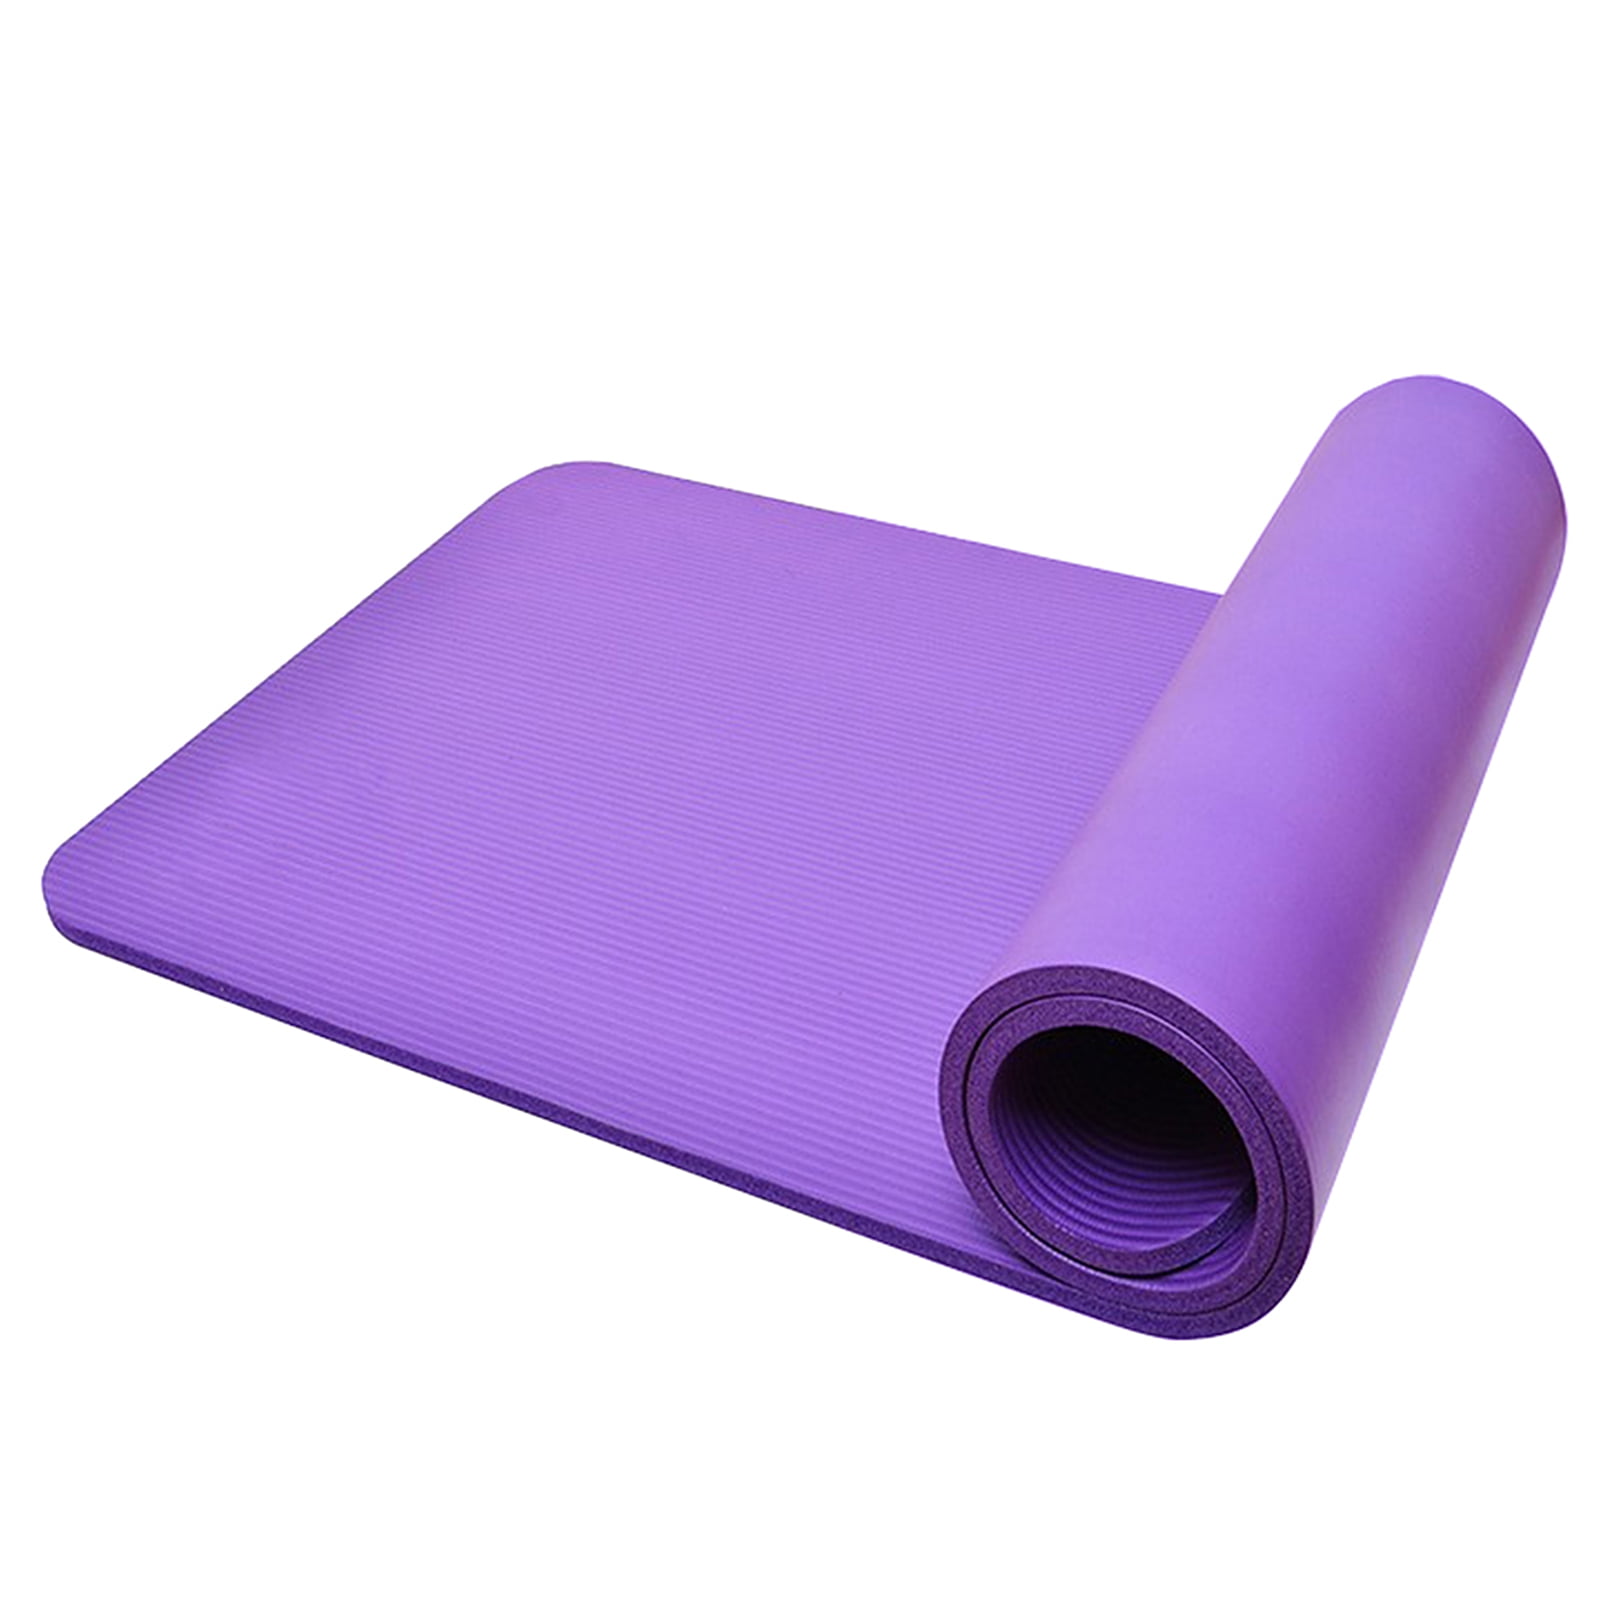 BLACK 10mm Yoga Mat Thick NonSlip for Pilates Gym Exercise Carry Strap Fitness 